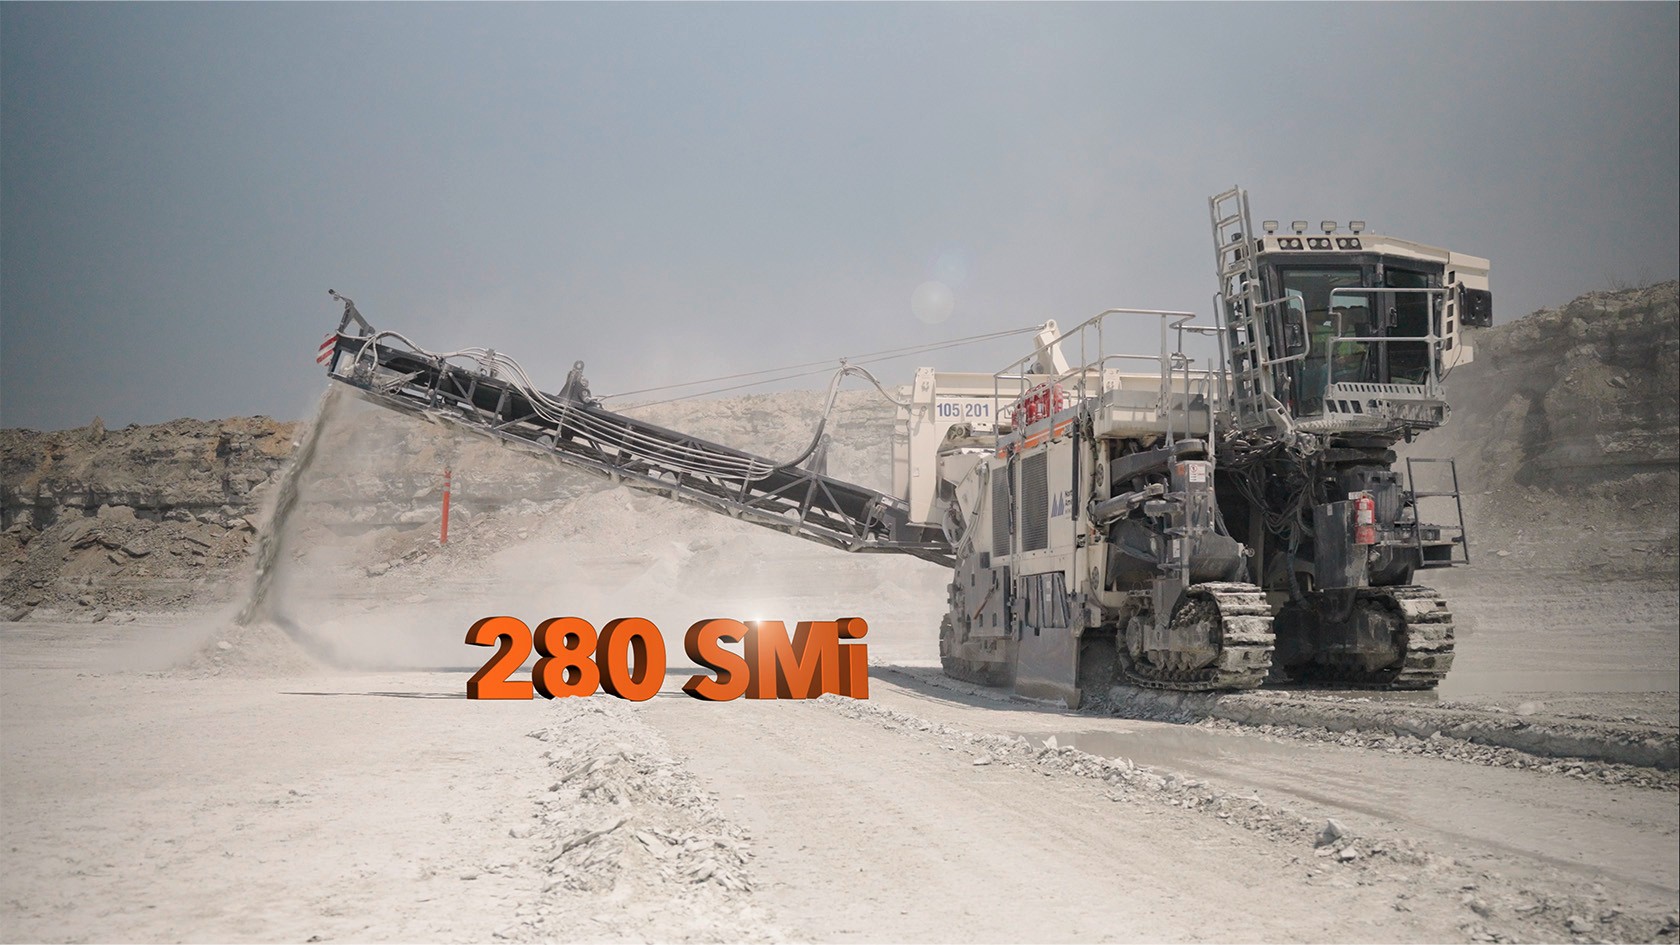 A Wirtgen Surface Miner 280 SM(i) extracts limestone in a quarry